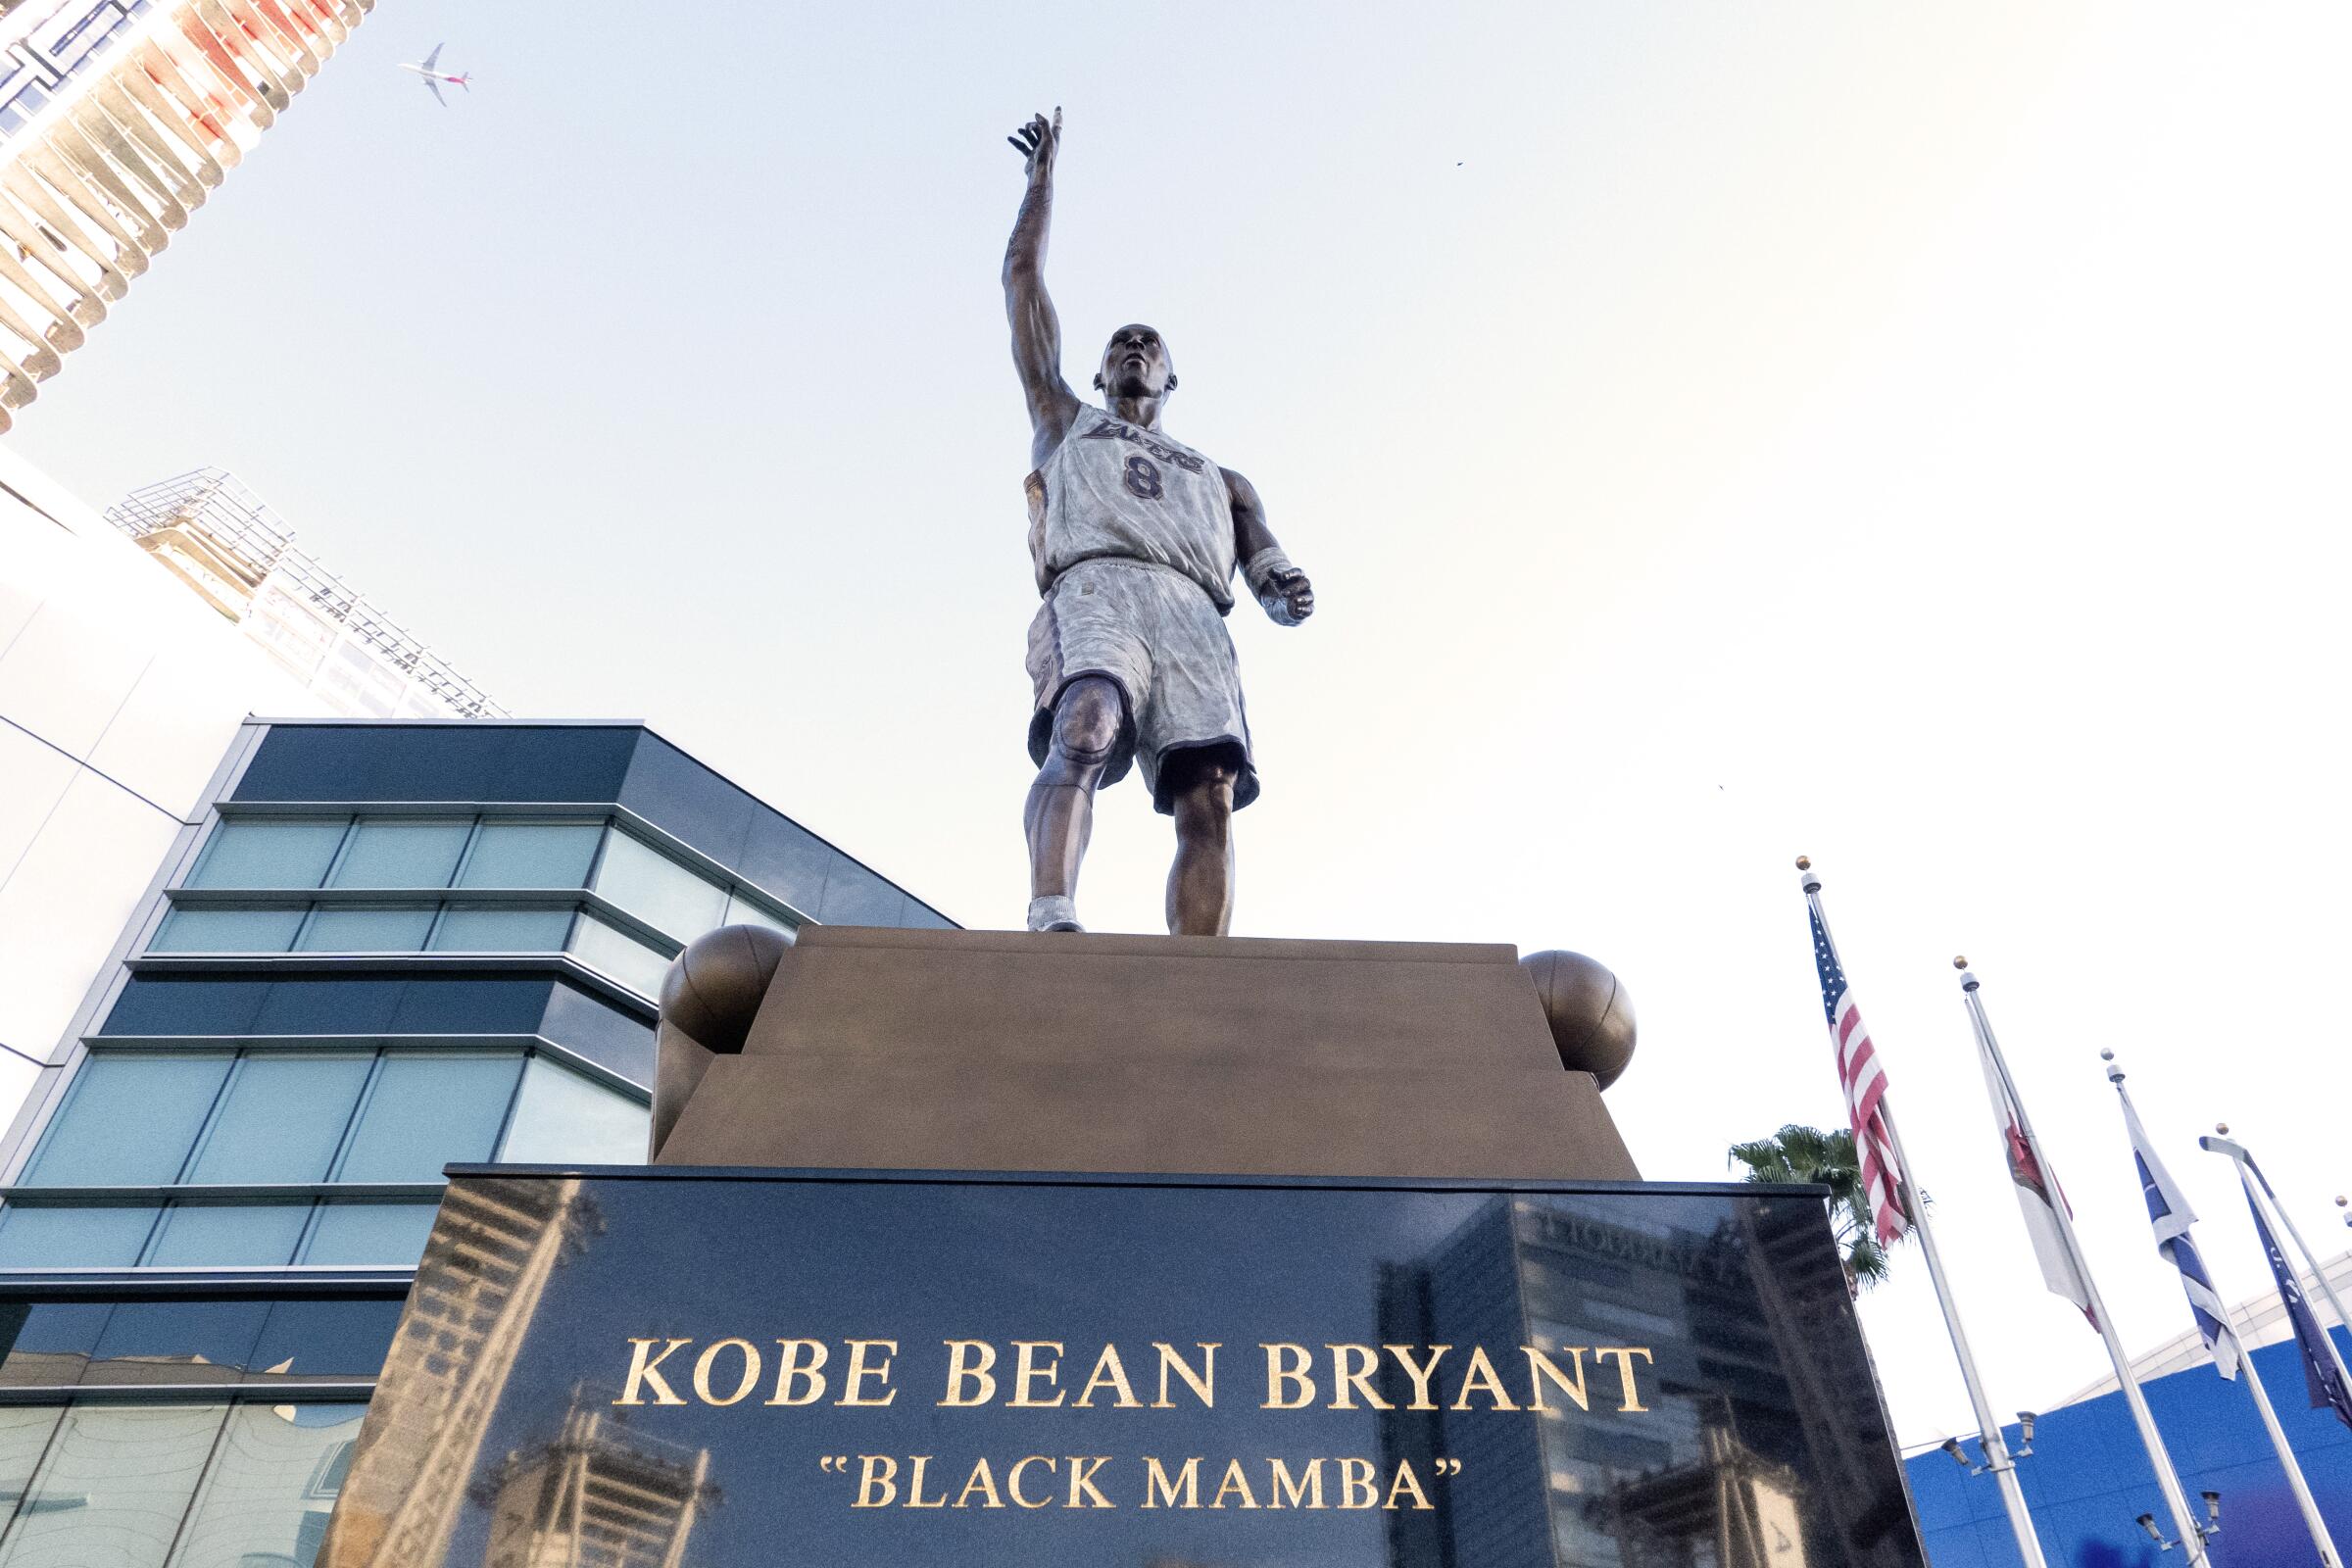 Kobe Bryant's recently unveiled statue at Star Plaza next to Crypto.com Arena.